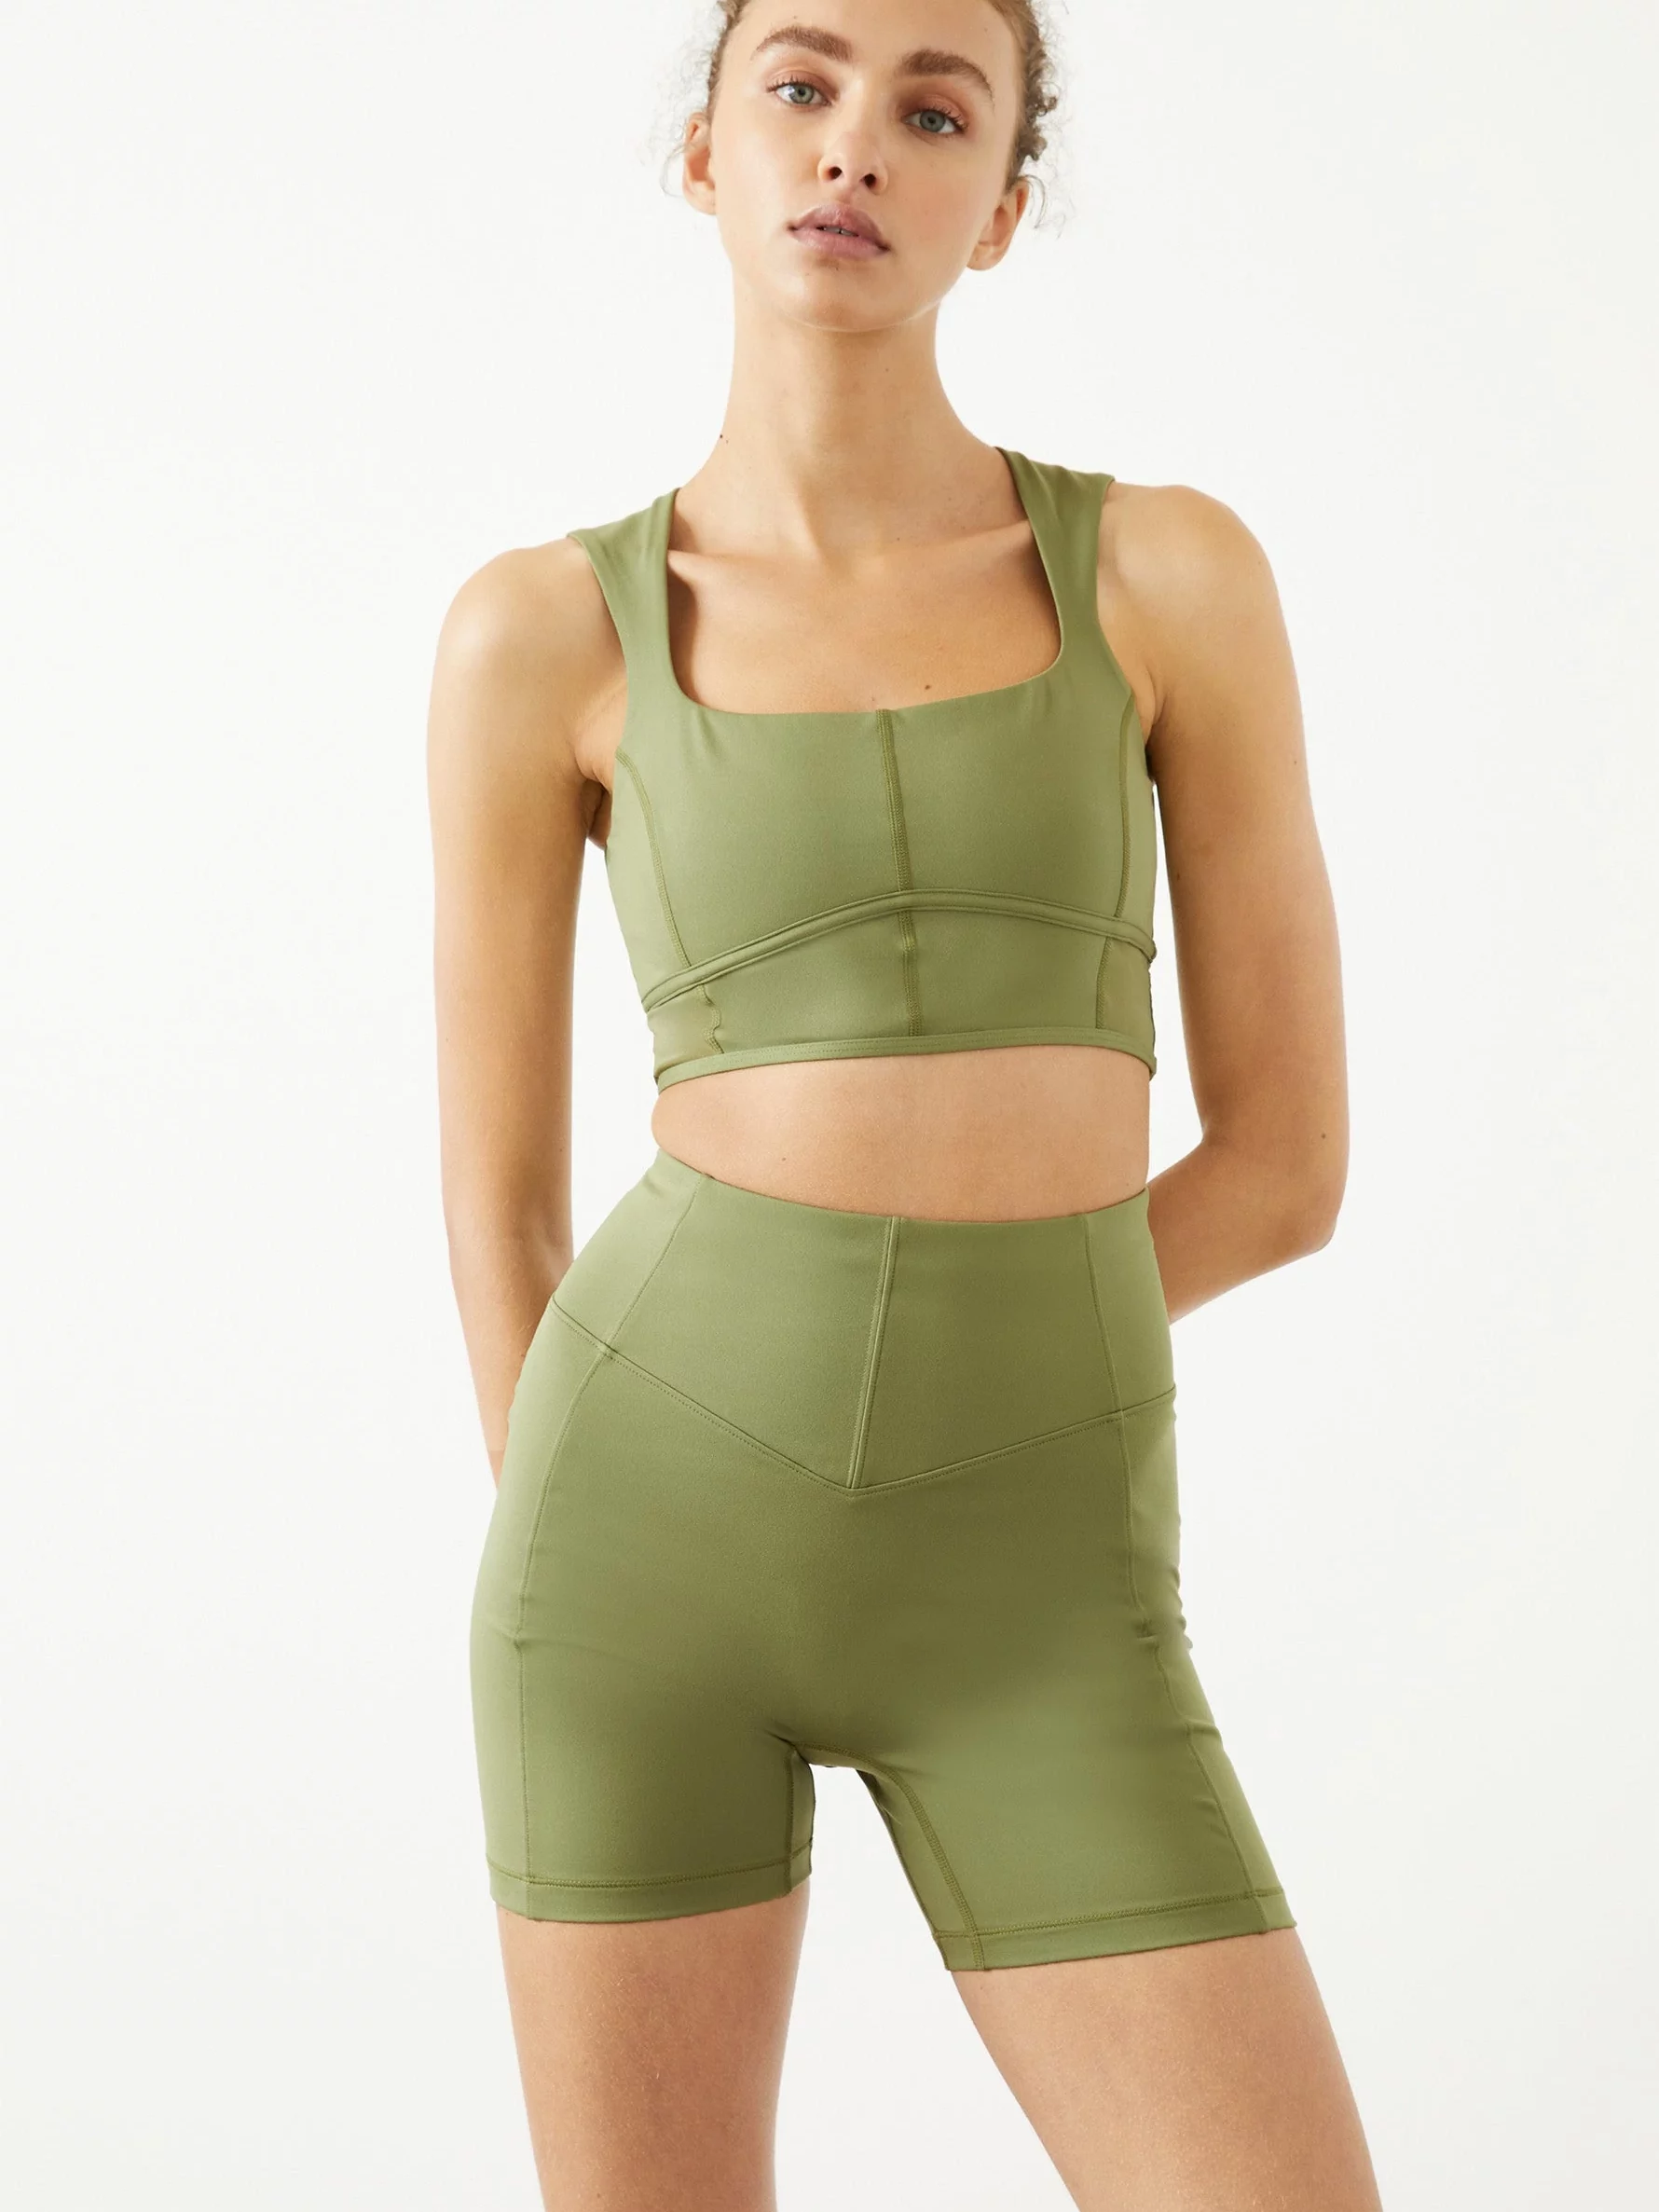 Light green athletic set. Top is squareneck and cropped with seams for decoration. The bottoms are biker shorts with the same decorative seams.